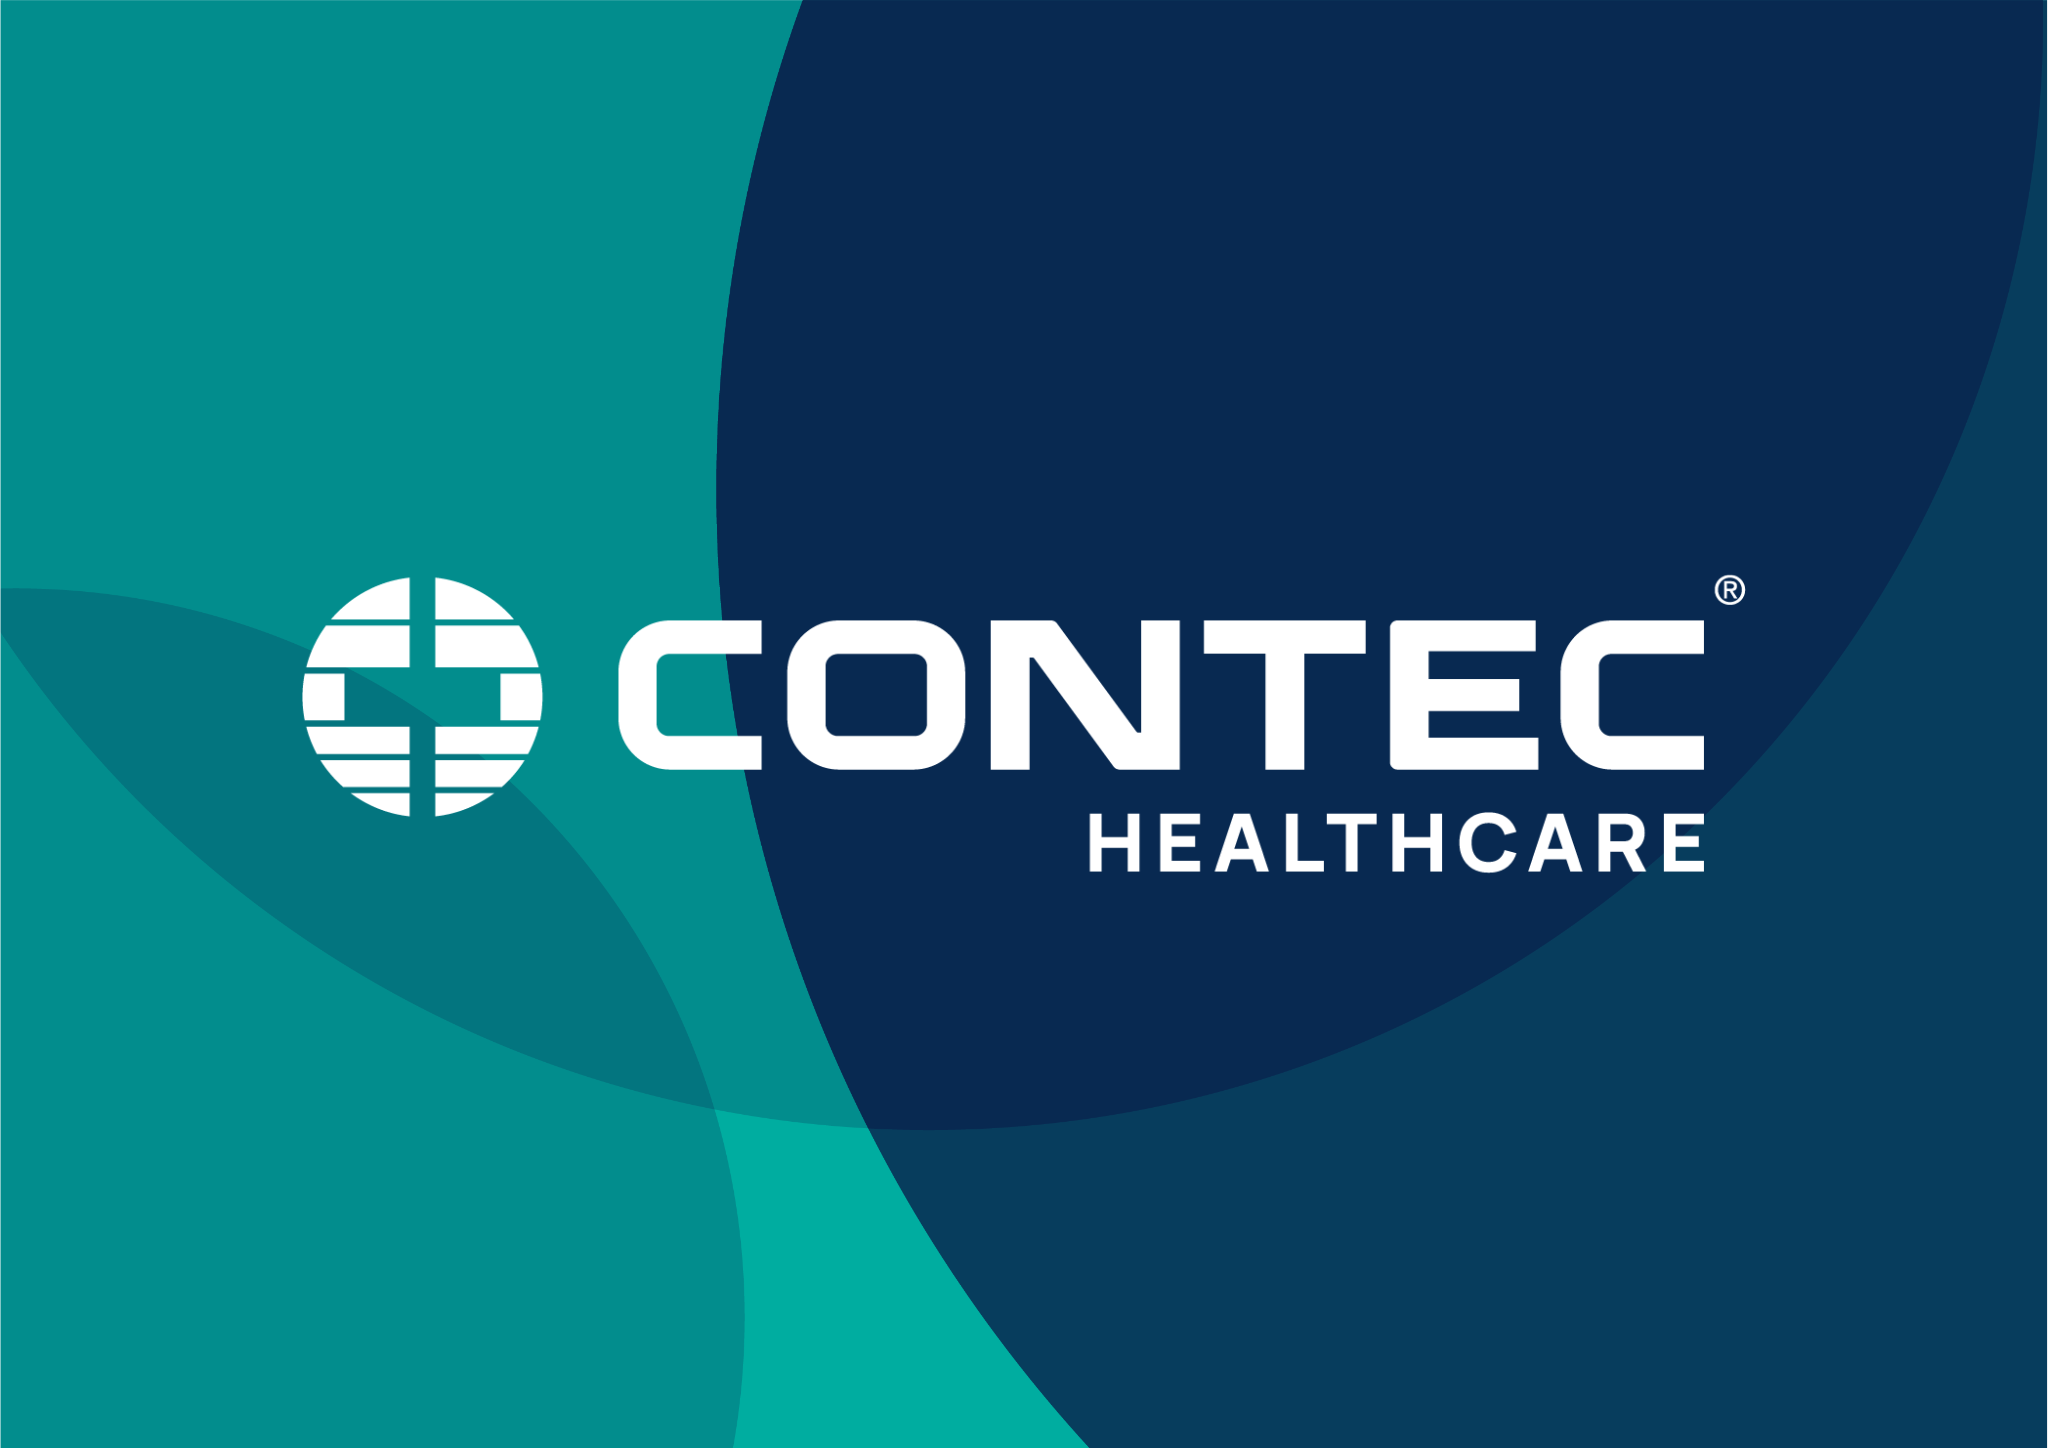  Exciting Changes to Our Contec Healthcare Branding!